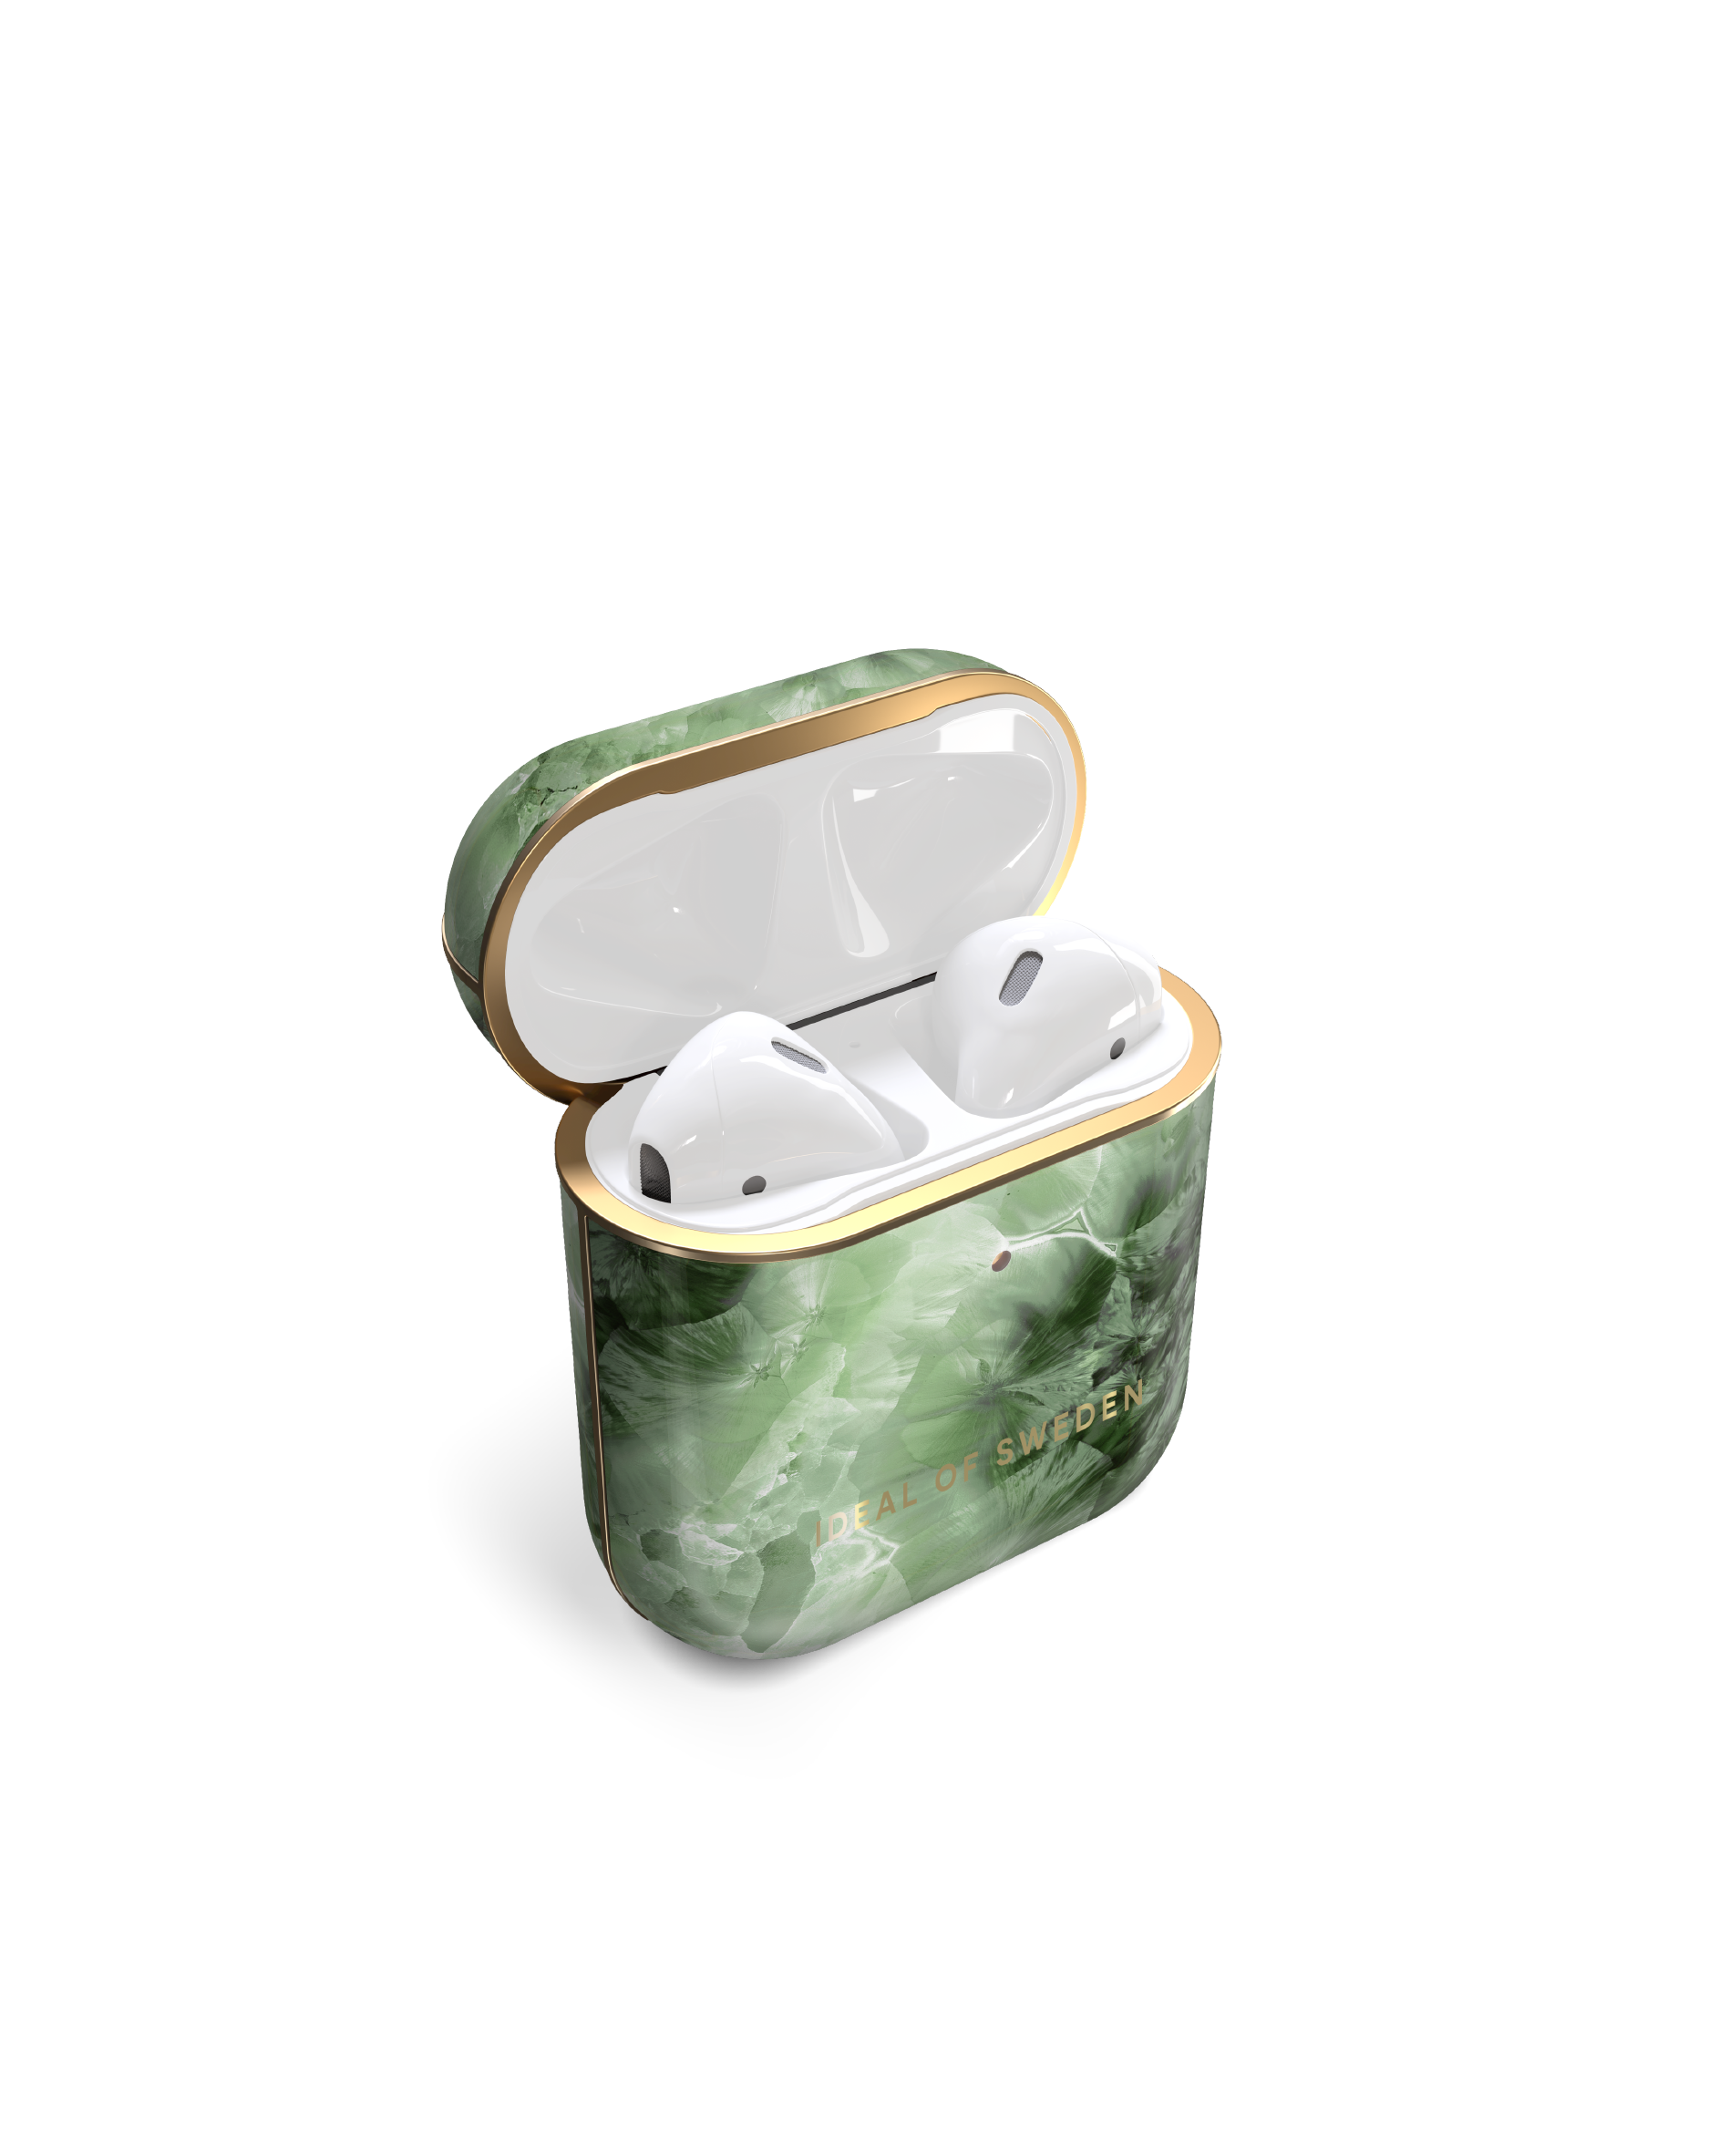 IDFAPC-230 SWEDEN Sky AirPod Full IDEAL Green Apple Crystal für: Case Cover OF passend